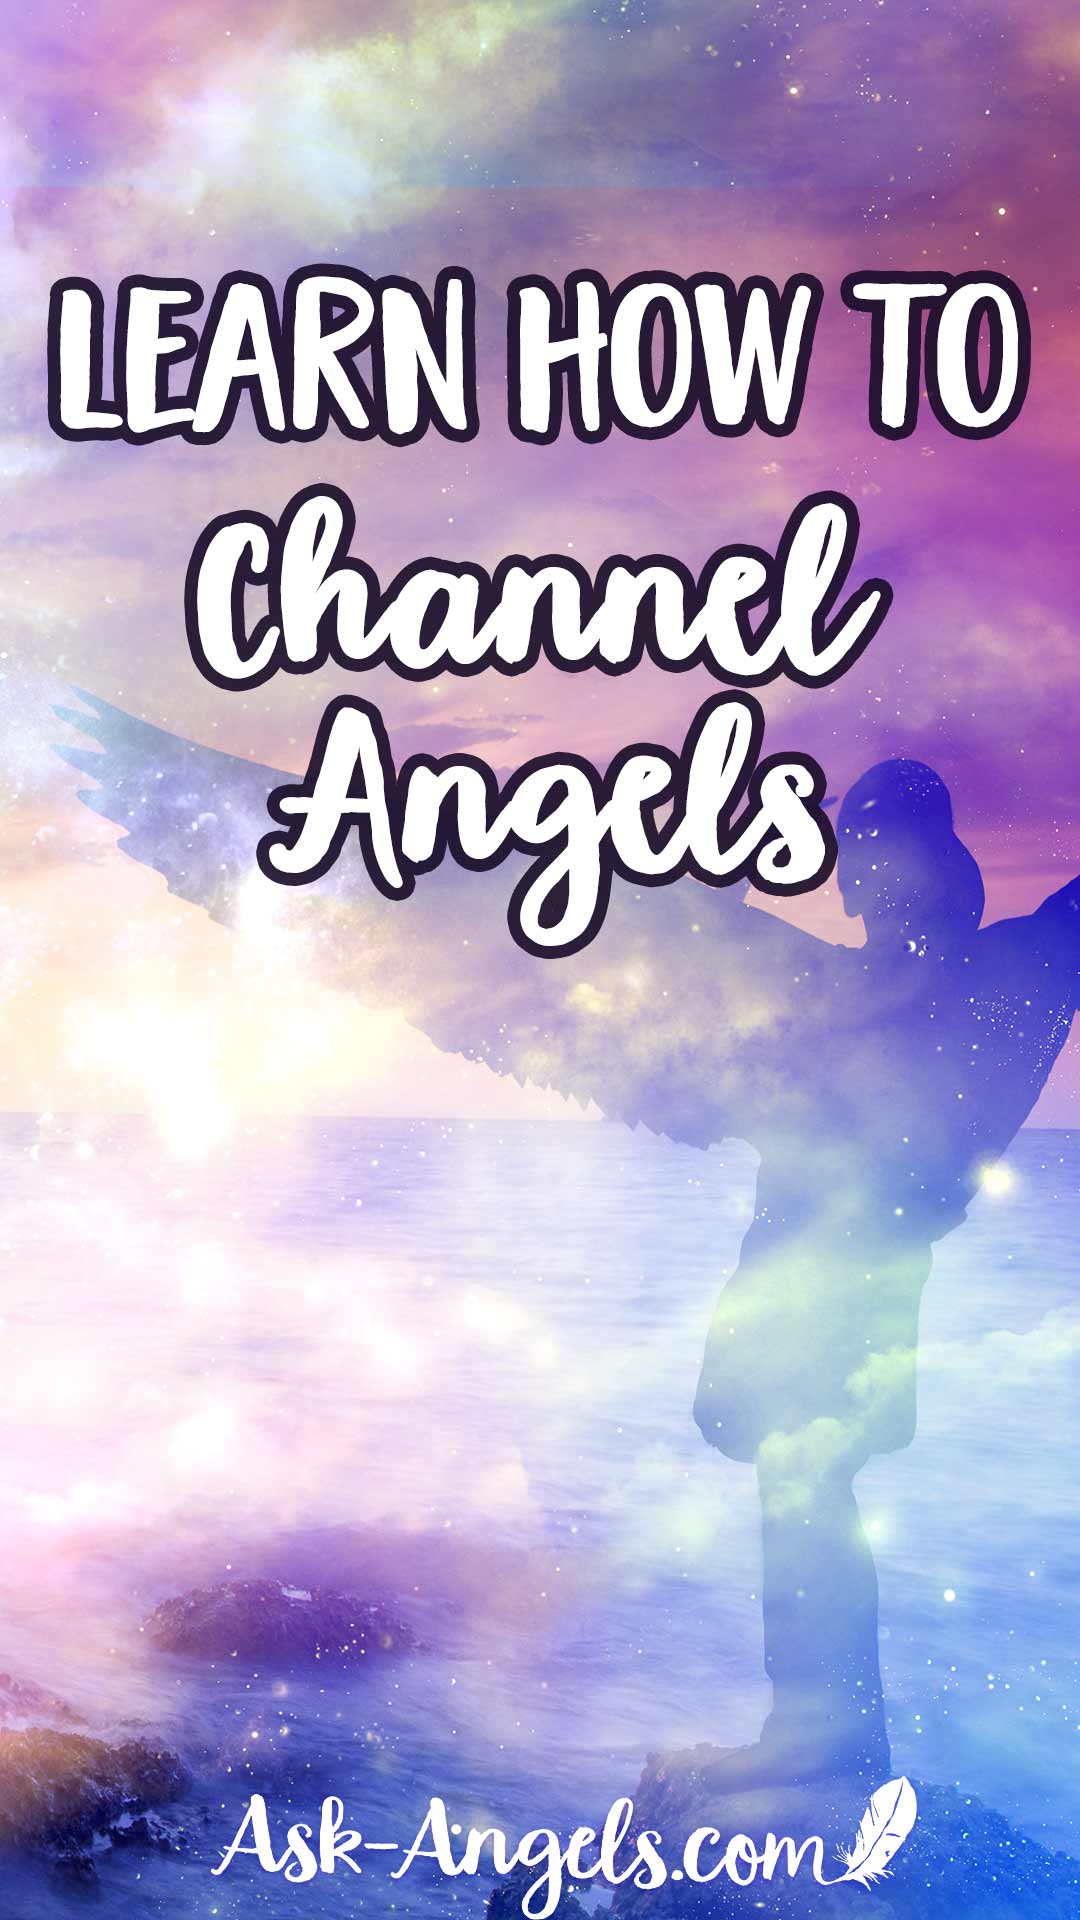 How to Channel Your Angels